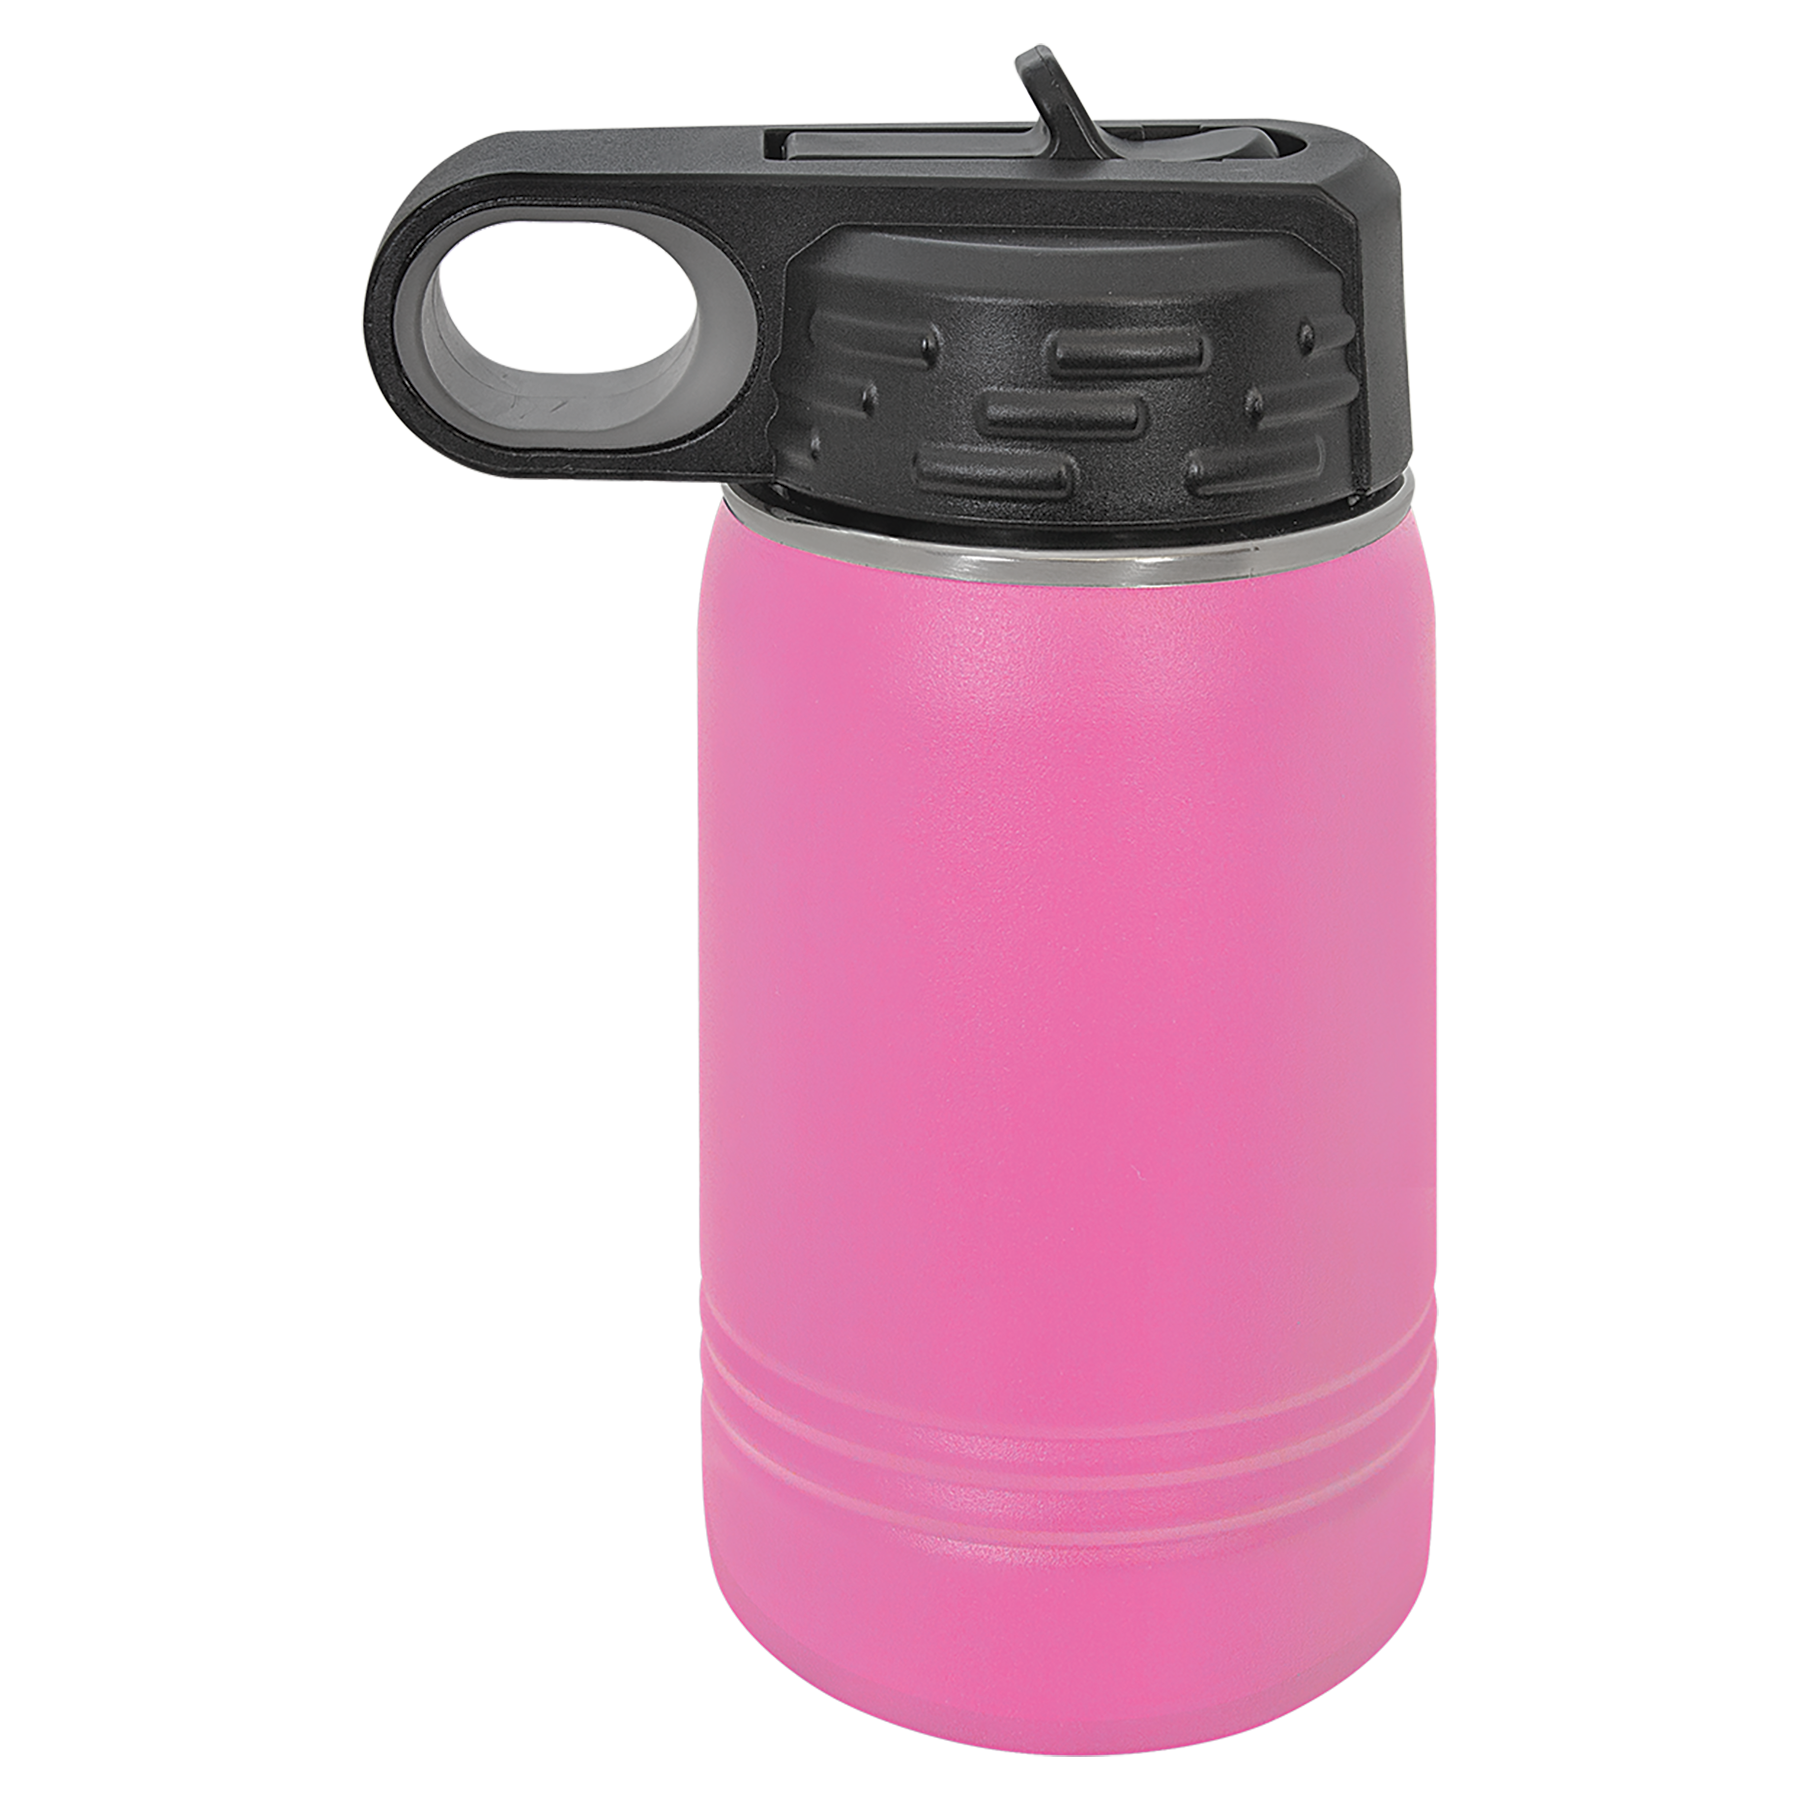 Pink 12oz Water bottle -One Free Engraving -Double-wall Vacuum Insulated -Made from 18/8 Gauge Stainless Steel (Type 304 Food Grade) -Lid is BPA Free (Hand Wash Only) -Dishwasher Safe -Works with Cold and Hot Drinks -18 Color Options -Perfect for Personalized Gifts, Awards, Incentives, Swag & Fundraisers